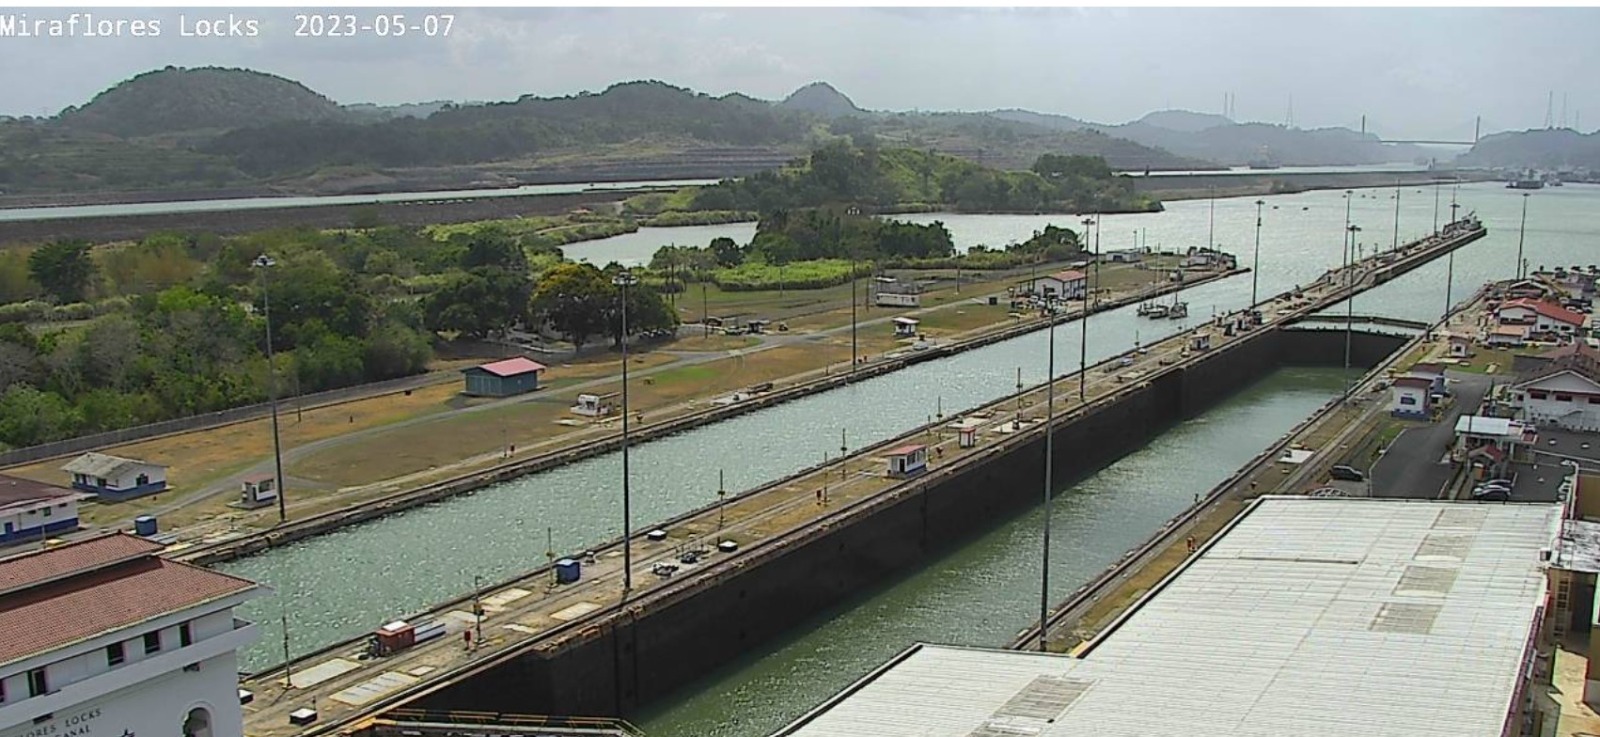 The Panama canal images/2023/can/mia6.jpg